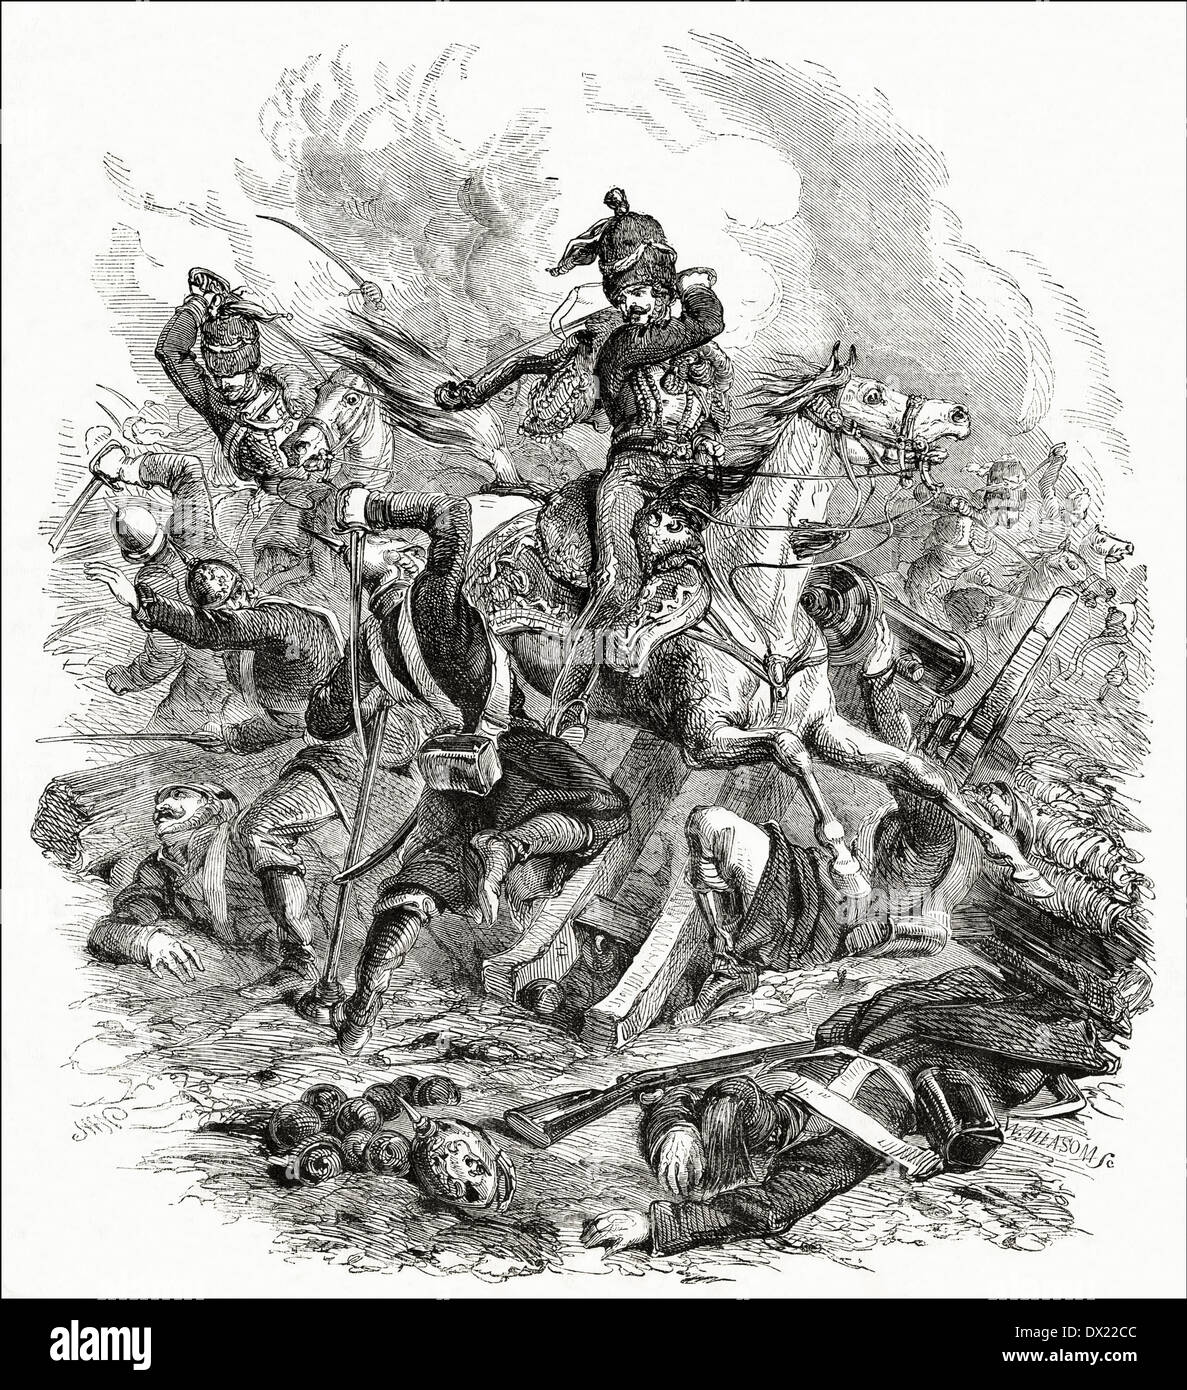 Earl of Cardigan leading The Charge of The Light Brigade at the Battle of Balaclava during the Crimean War 25th October 1854. Victorian engraving by William Measom. Stock Photo